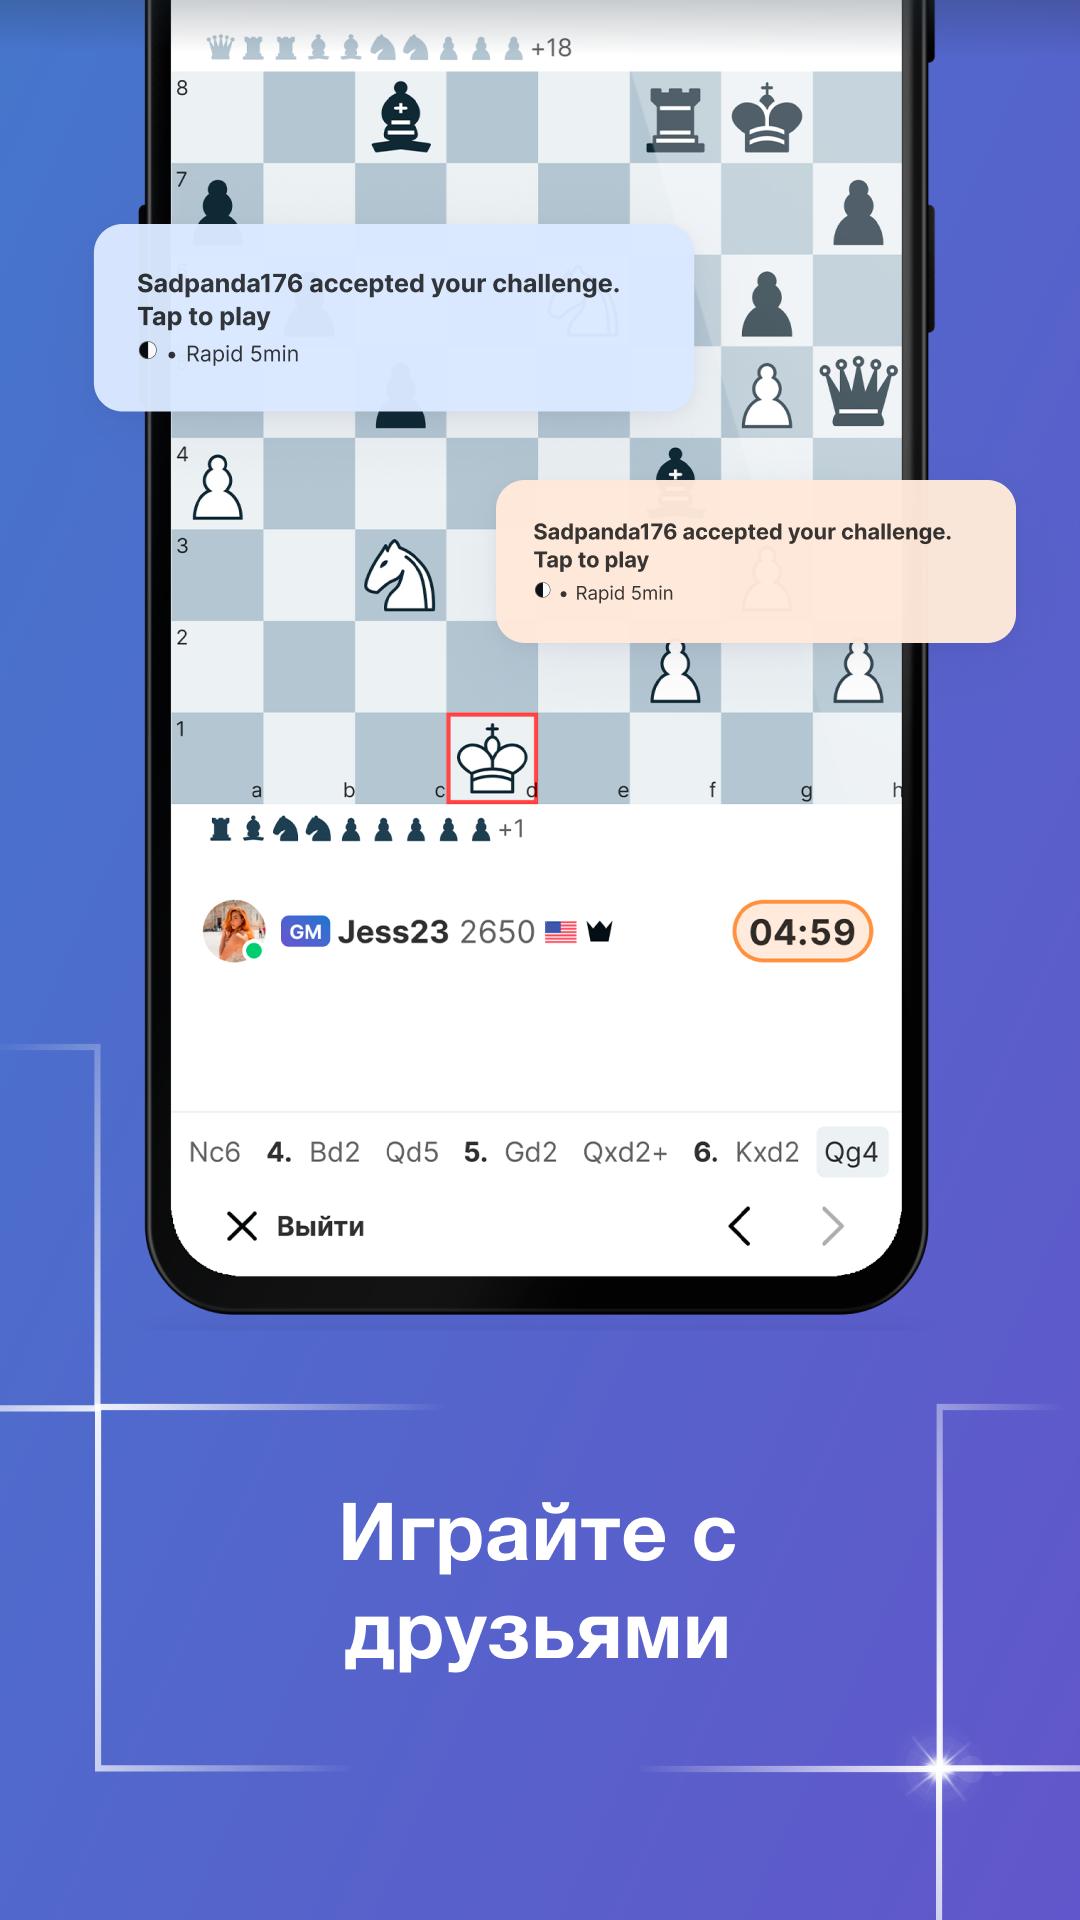 Chess24 APK Download for Android Free